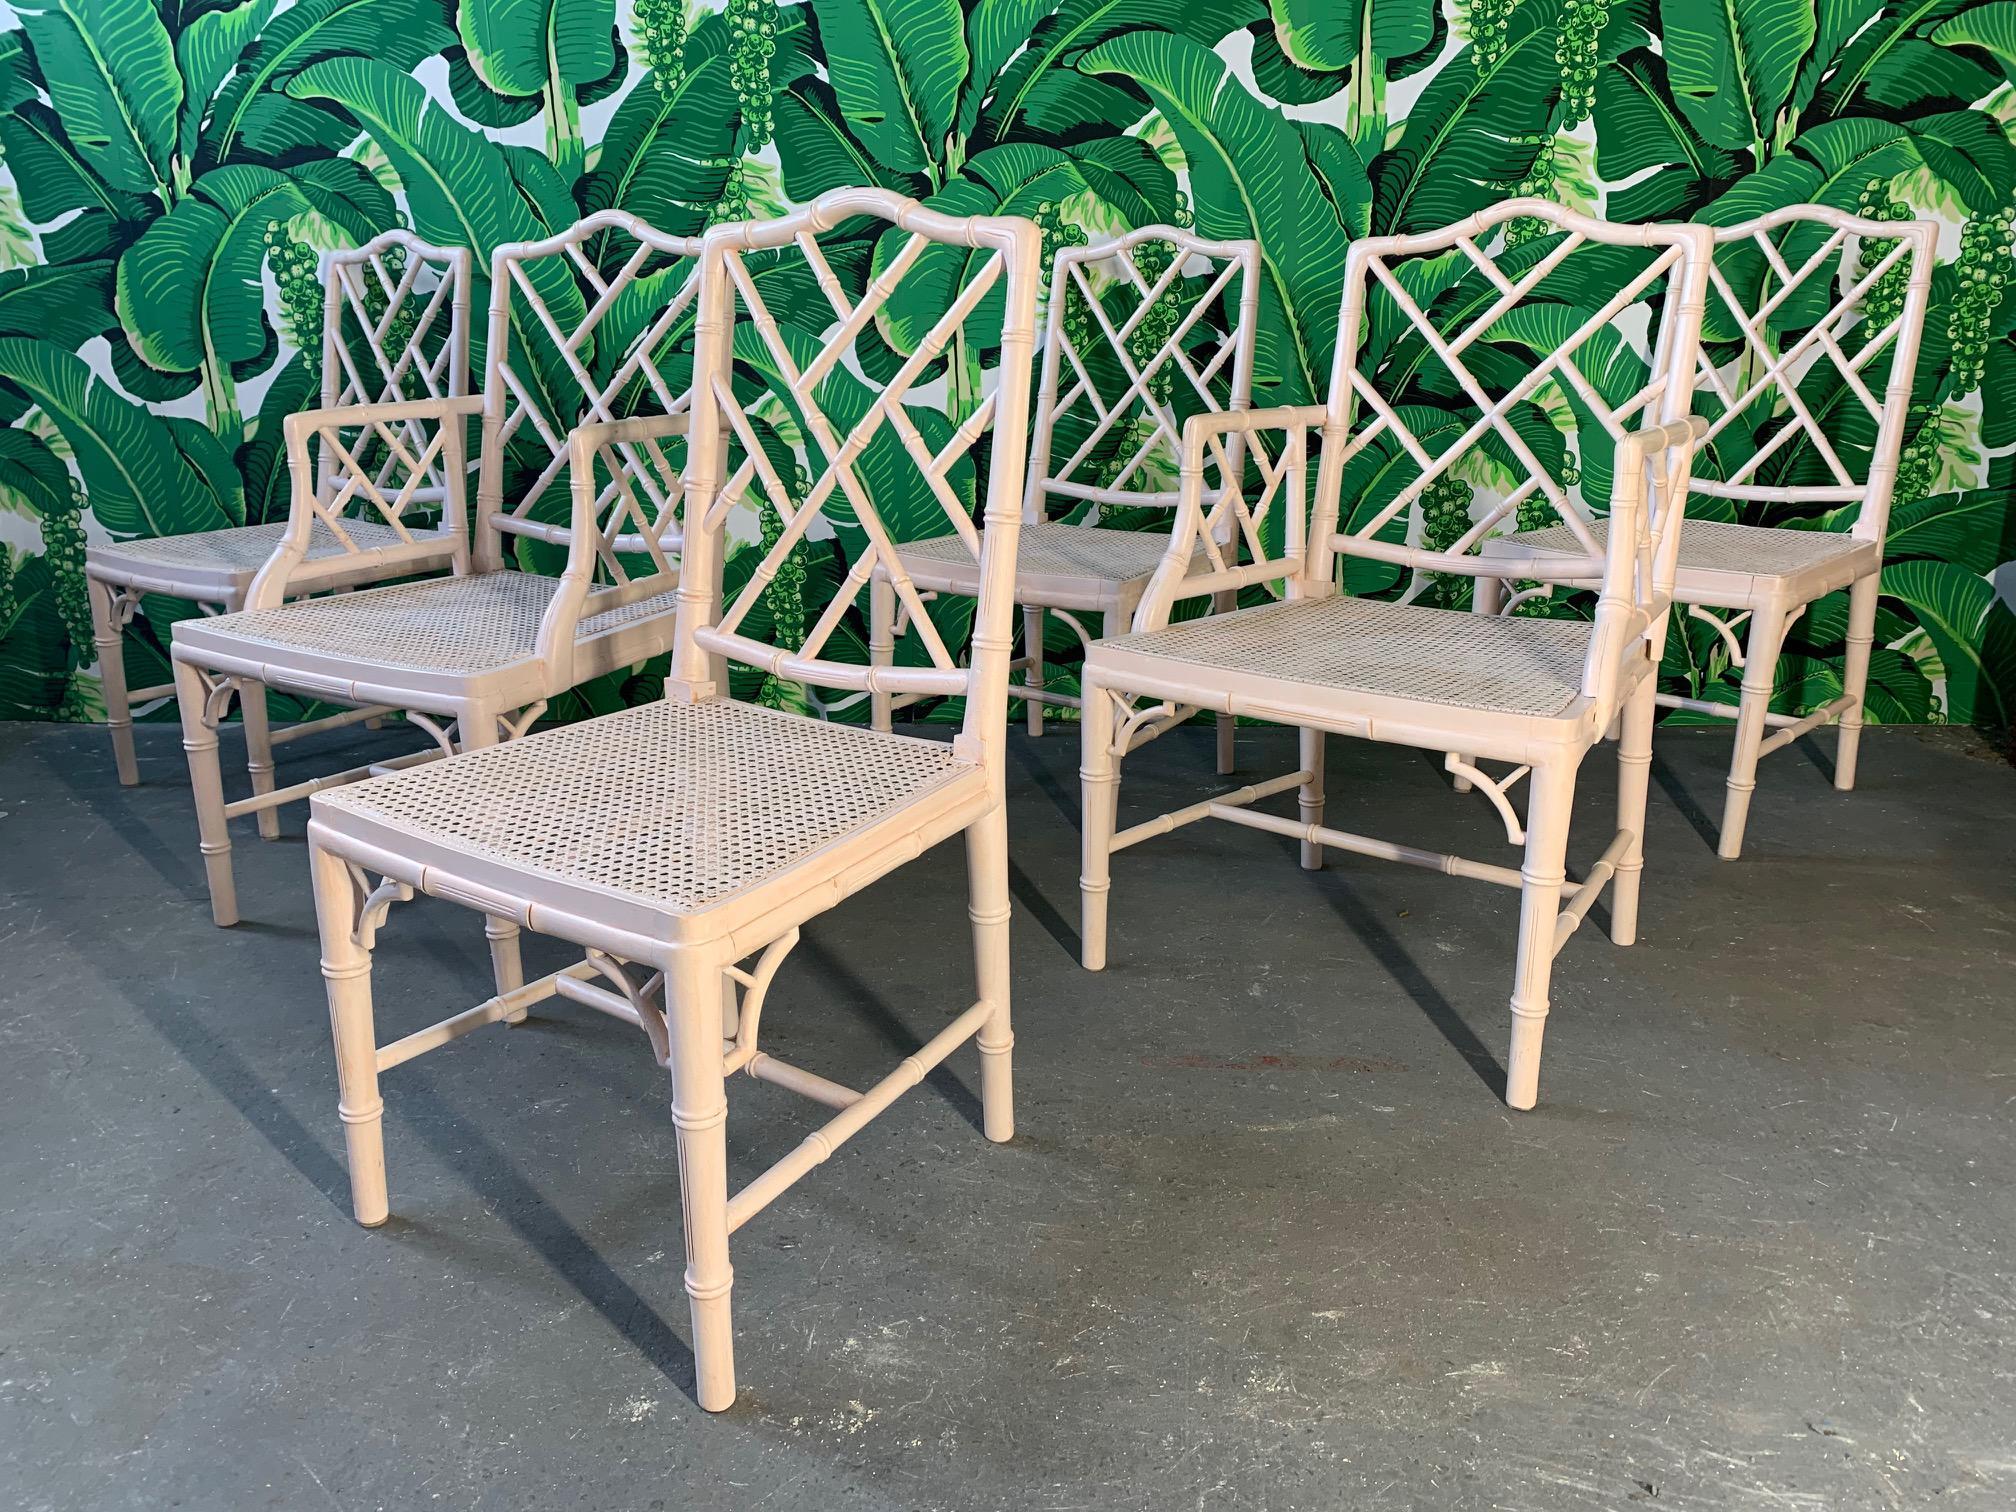 Set of 6 chinoiserie style faux bamboo dining chairs with cane seats in the Asian Chippendale style. Finished in a blush pink satin paint. Very good vintage condition with minor imperfections consistent with age. Chairs are structurally sound.  S5566